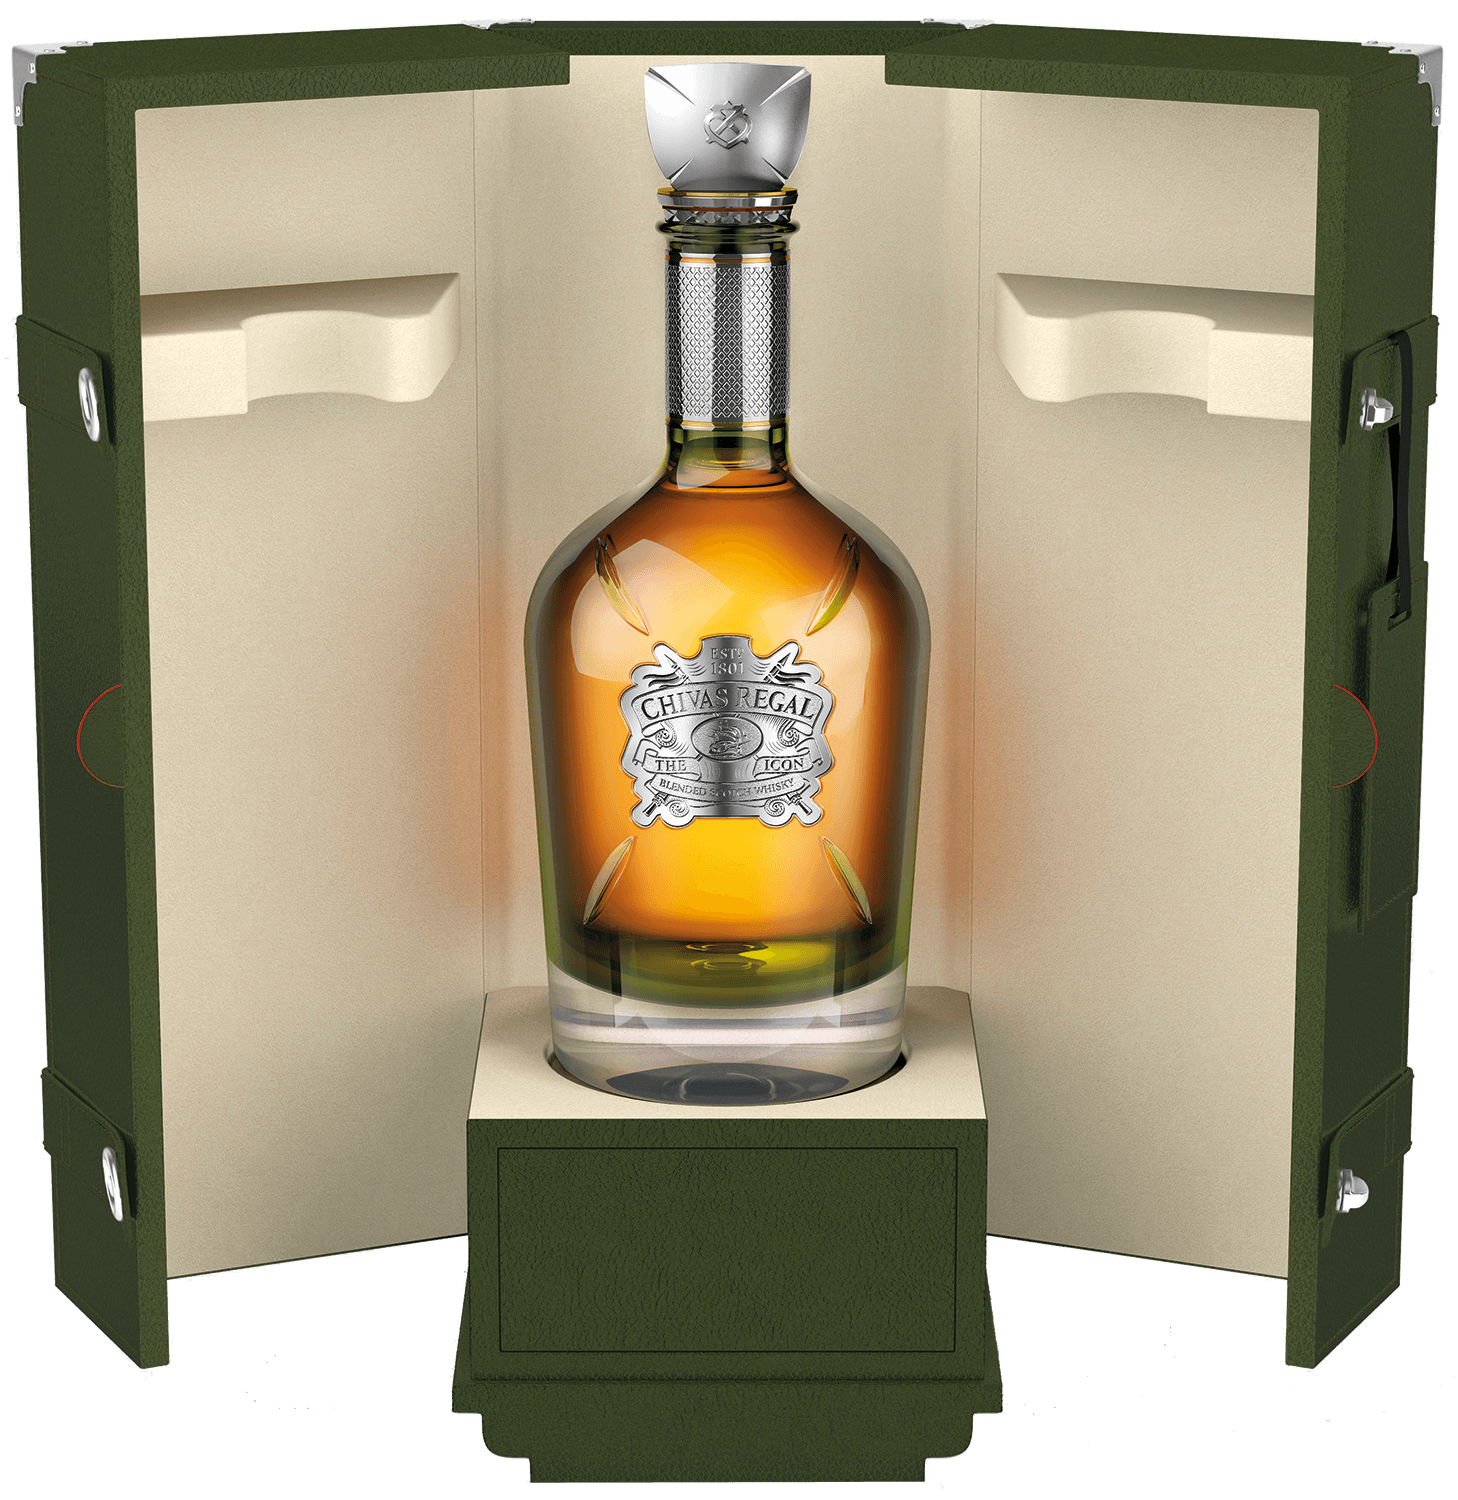 Chivas Regal Icon Blended Scotch Whisky (gift box) chivas regal blended scotch whisky 12 y o gift box